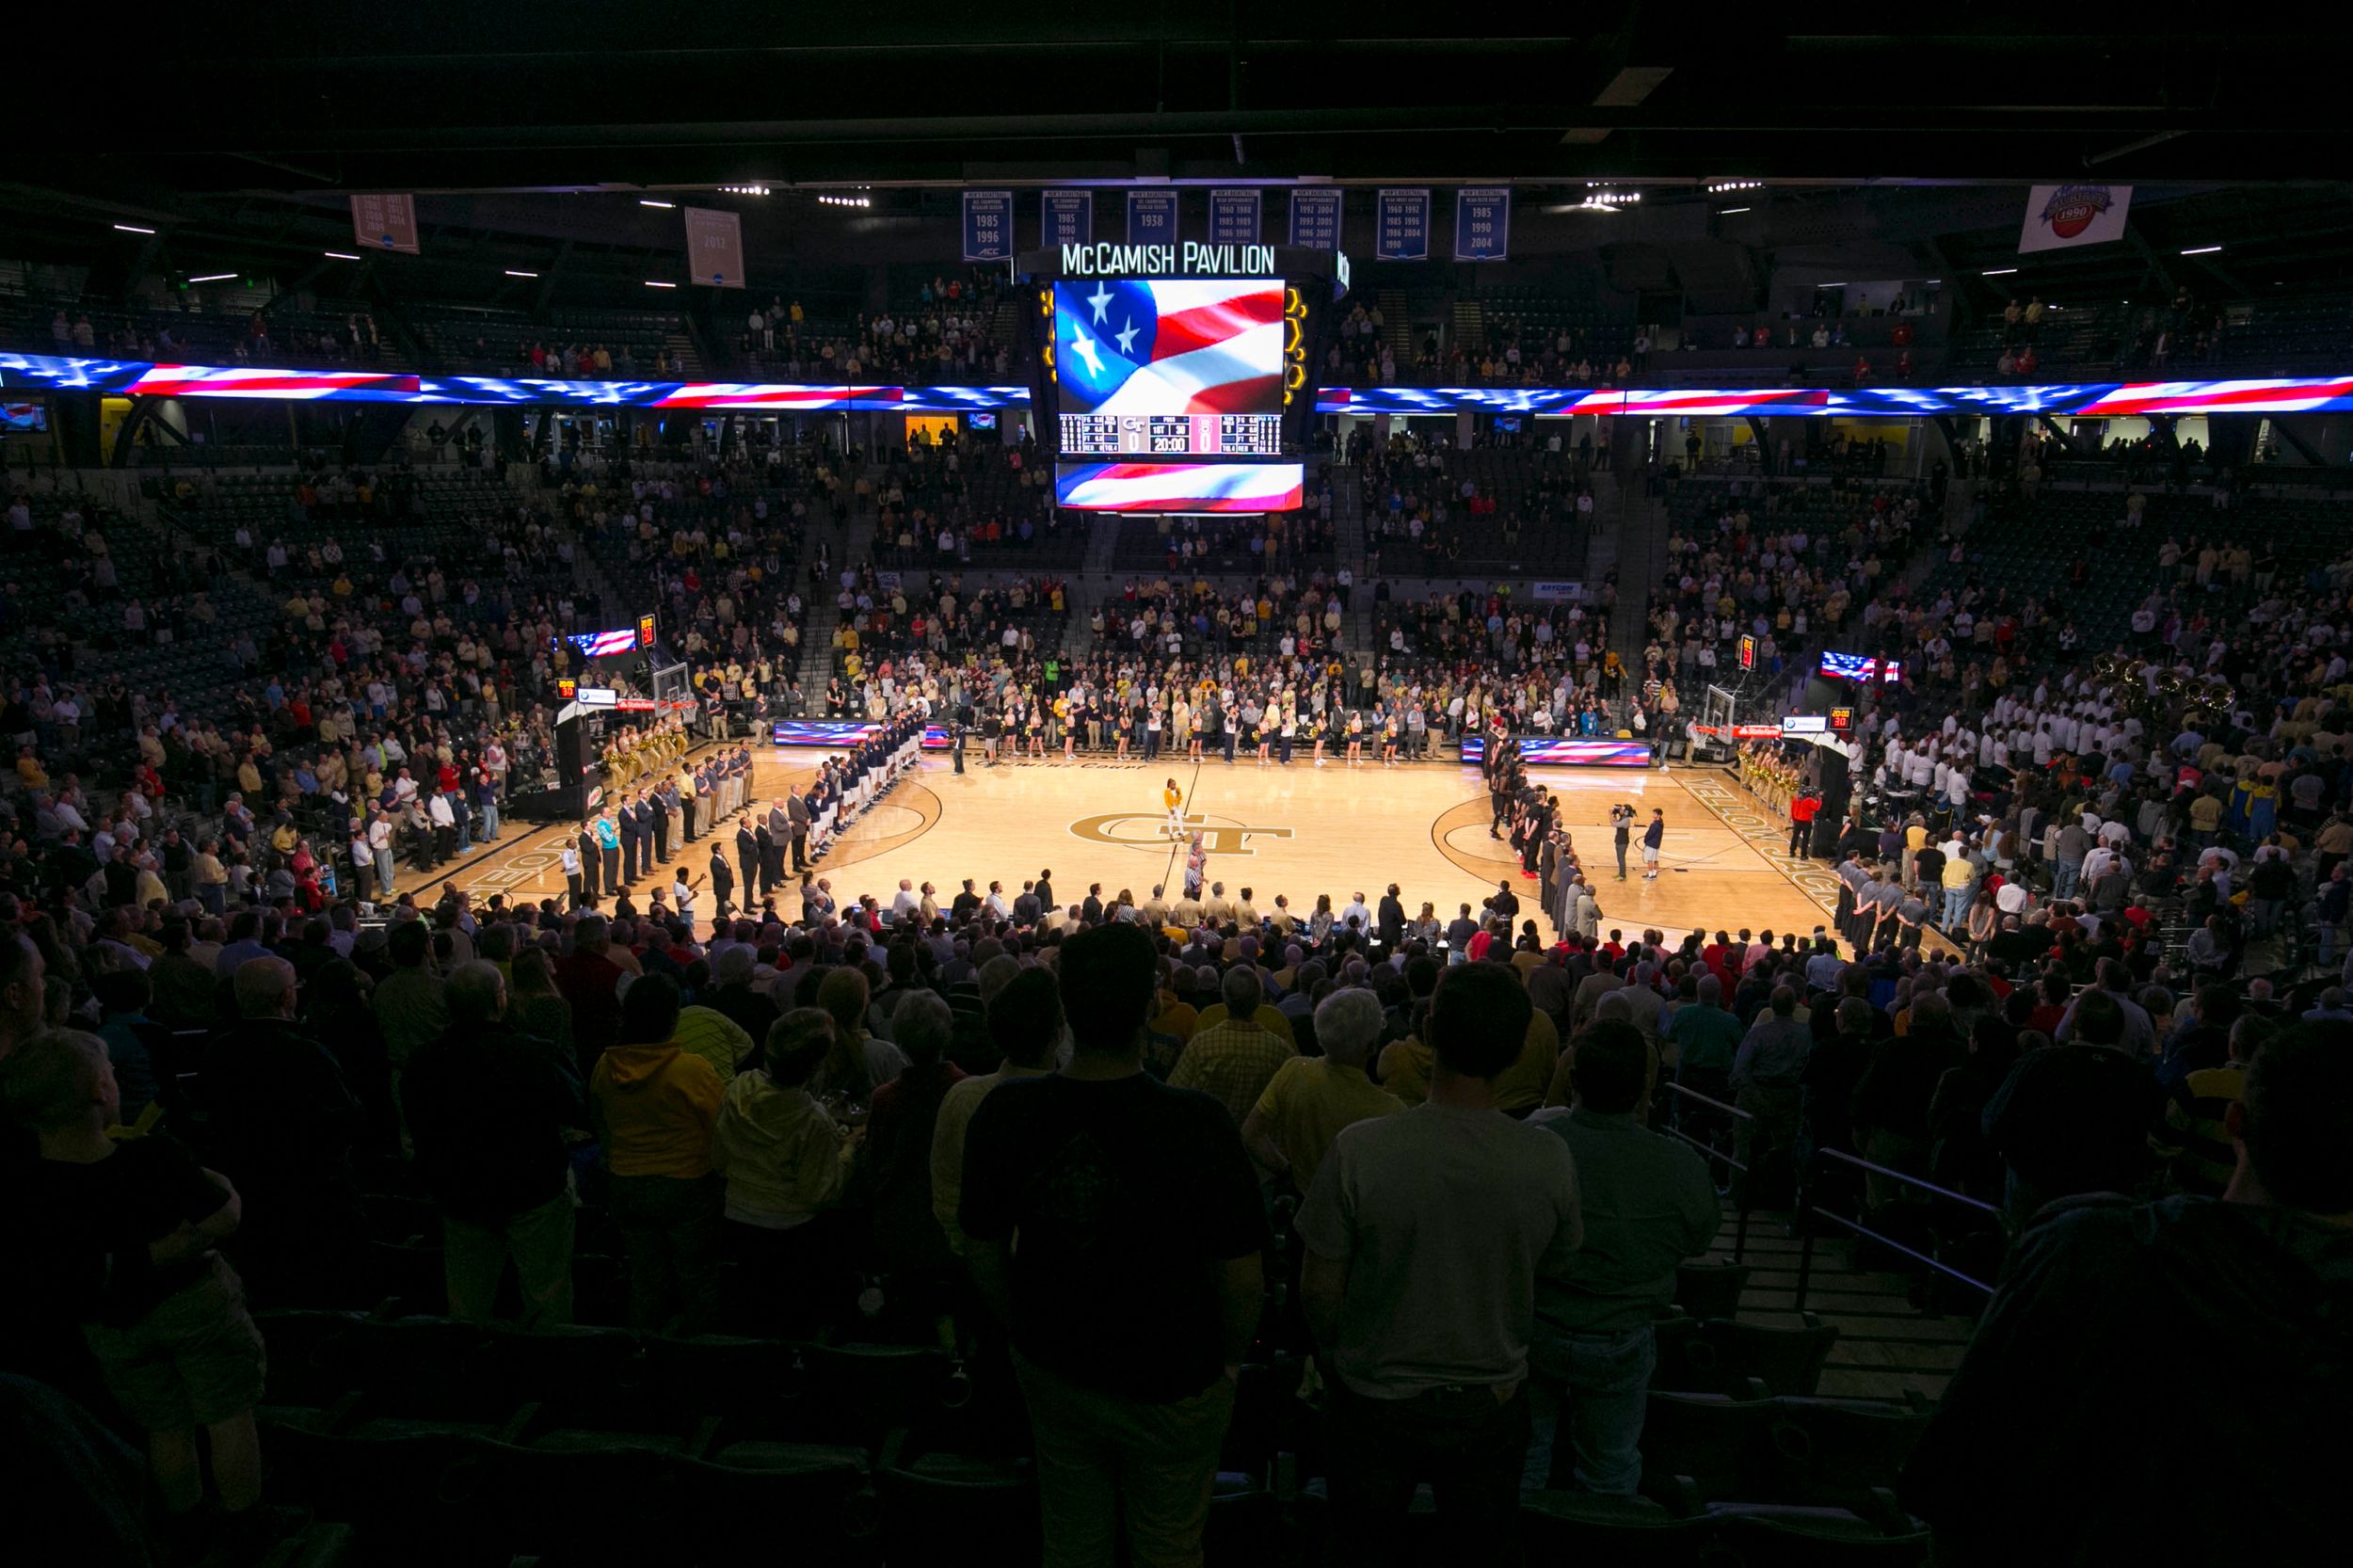 A general view of McCamish Pavilion during the national anthem prior to the game between the North Carolina State Wolfpack and the Georgia Tech Yellow Jackets. Credit: Jason Getz-USA TODAY Sports